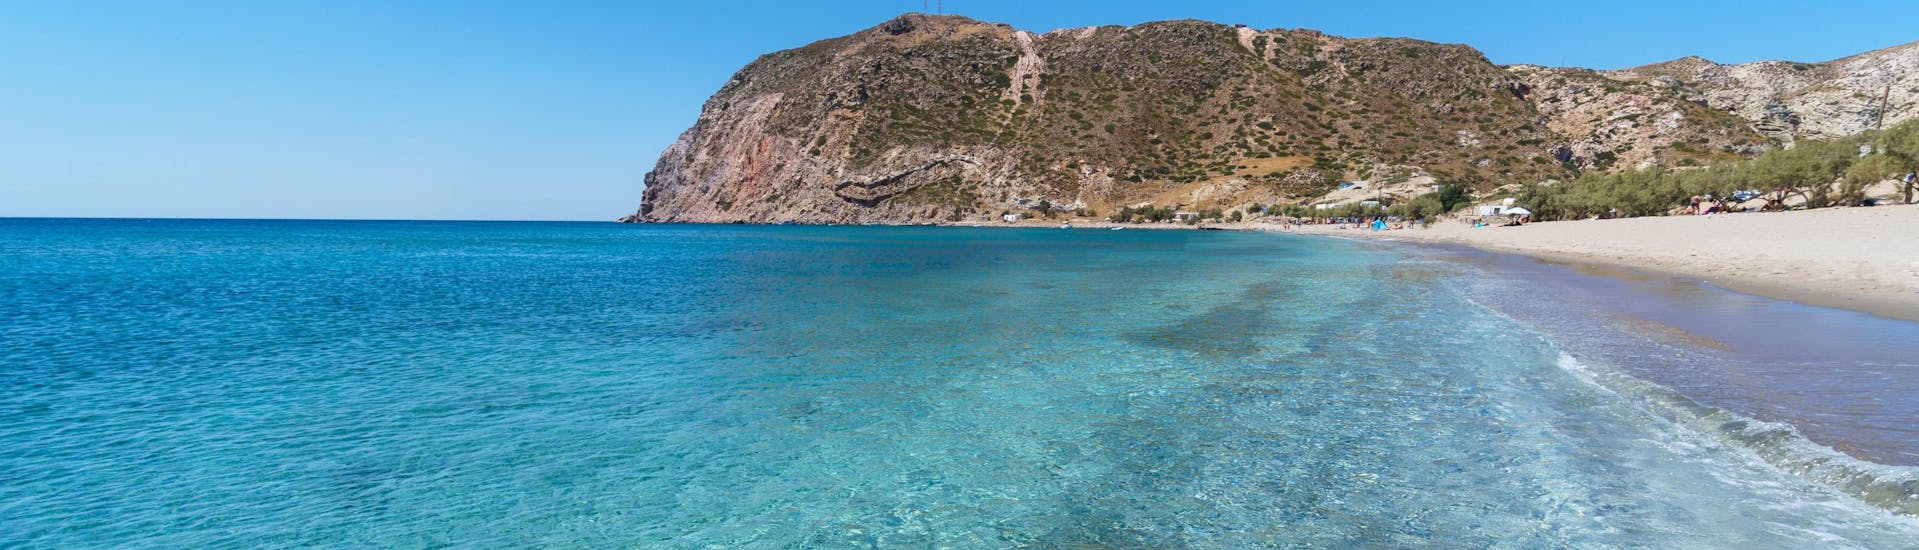 View over the beach of Agia Kiriaki, a wonderful location to visit on a boat trip in Milos.